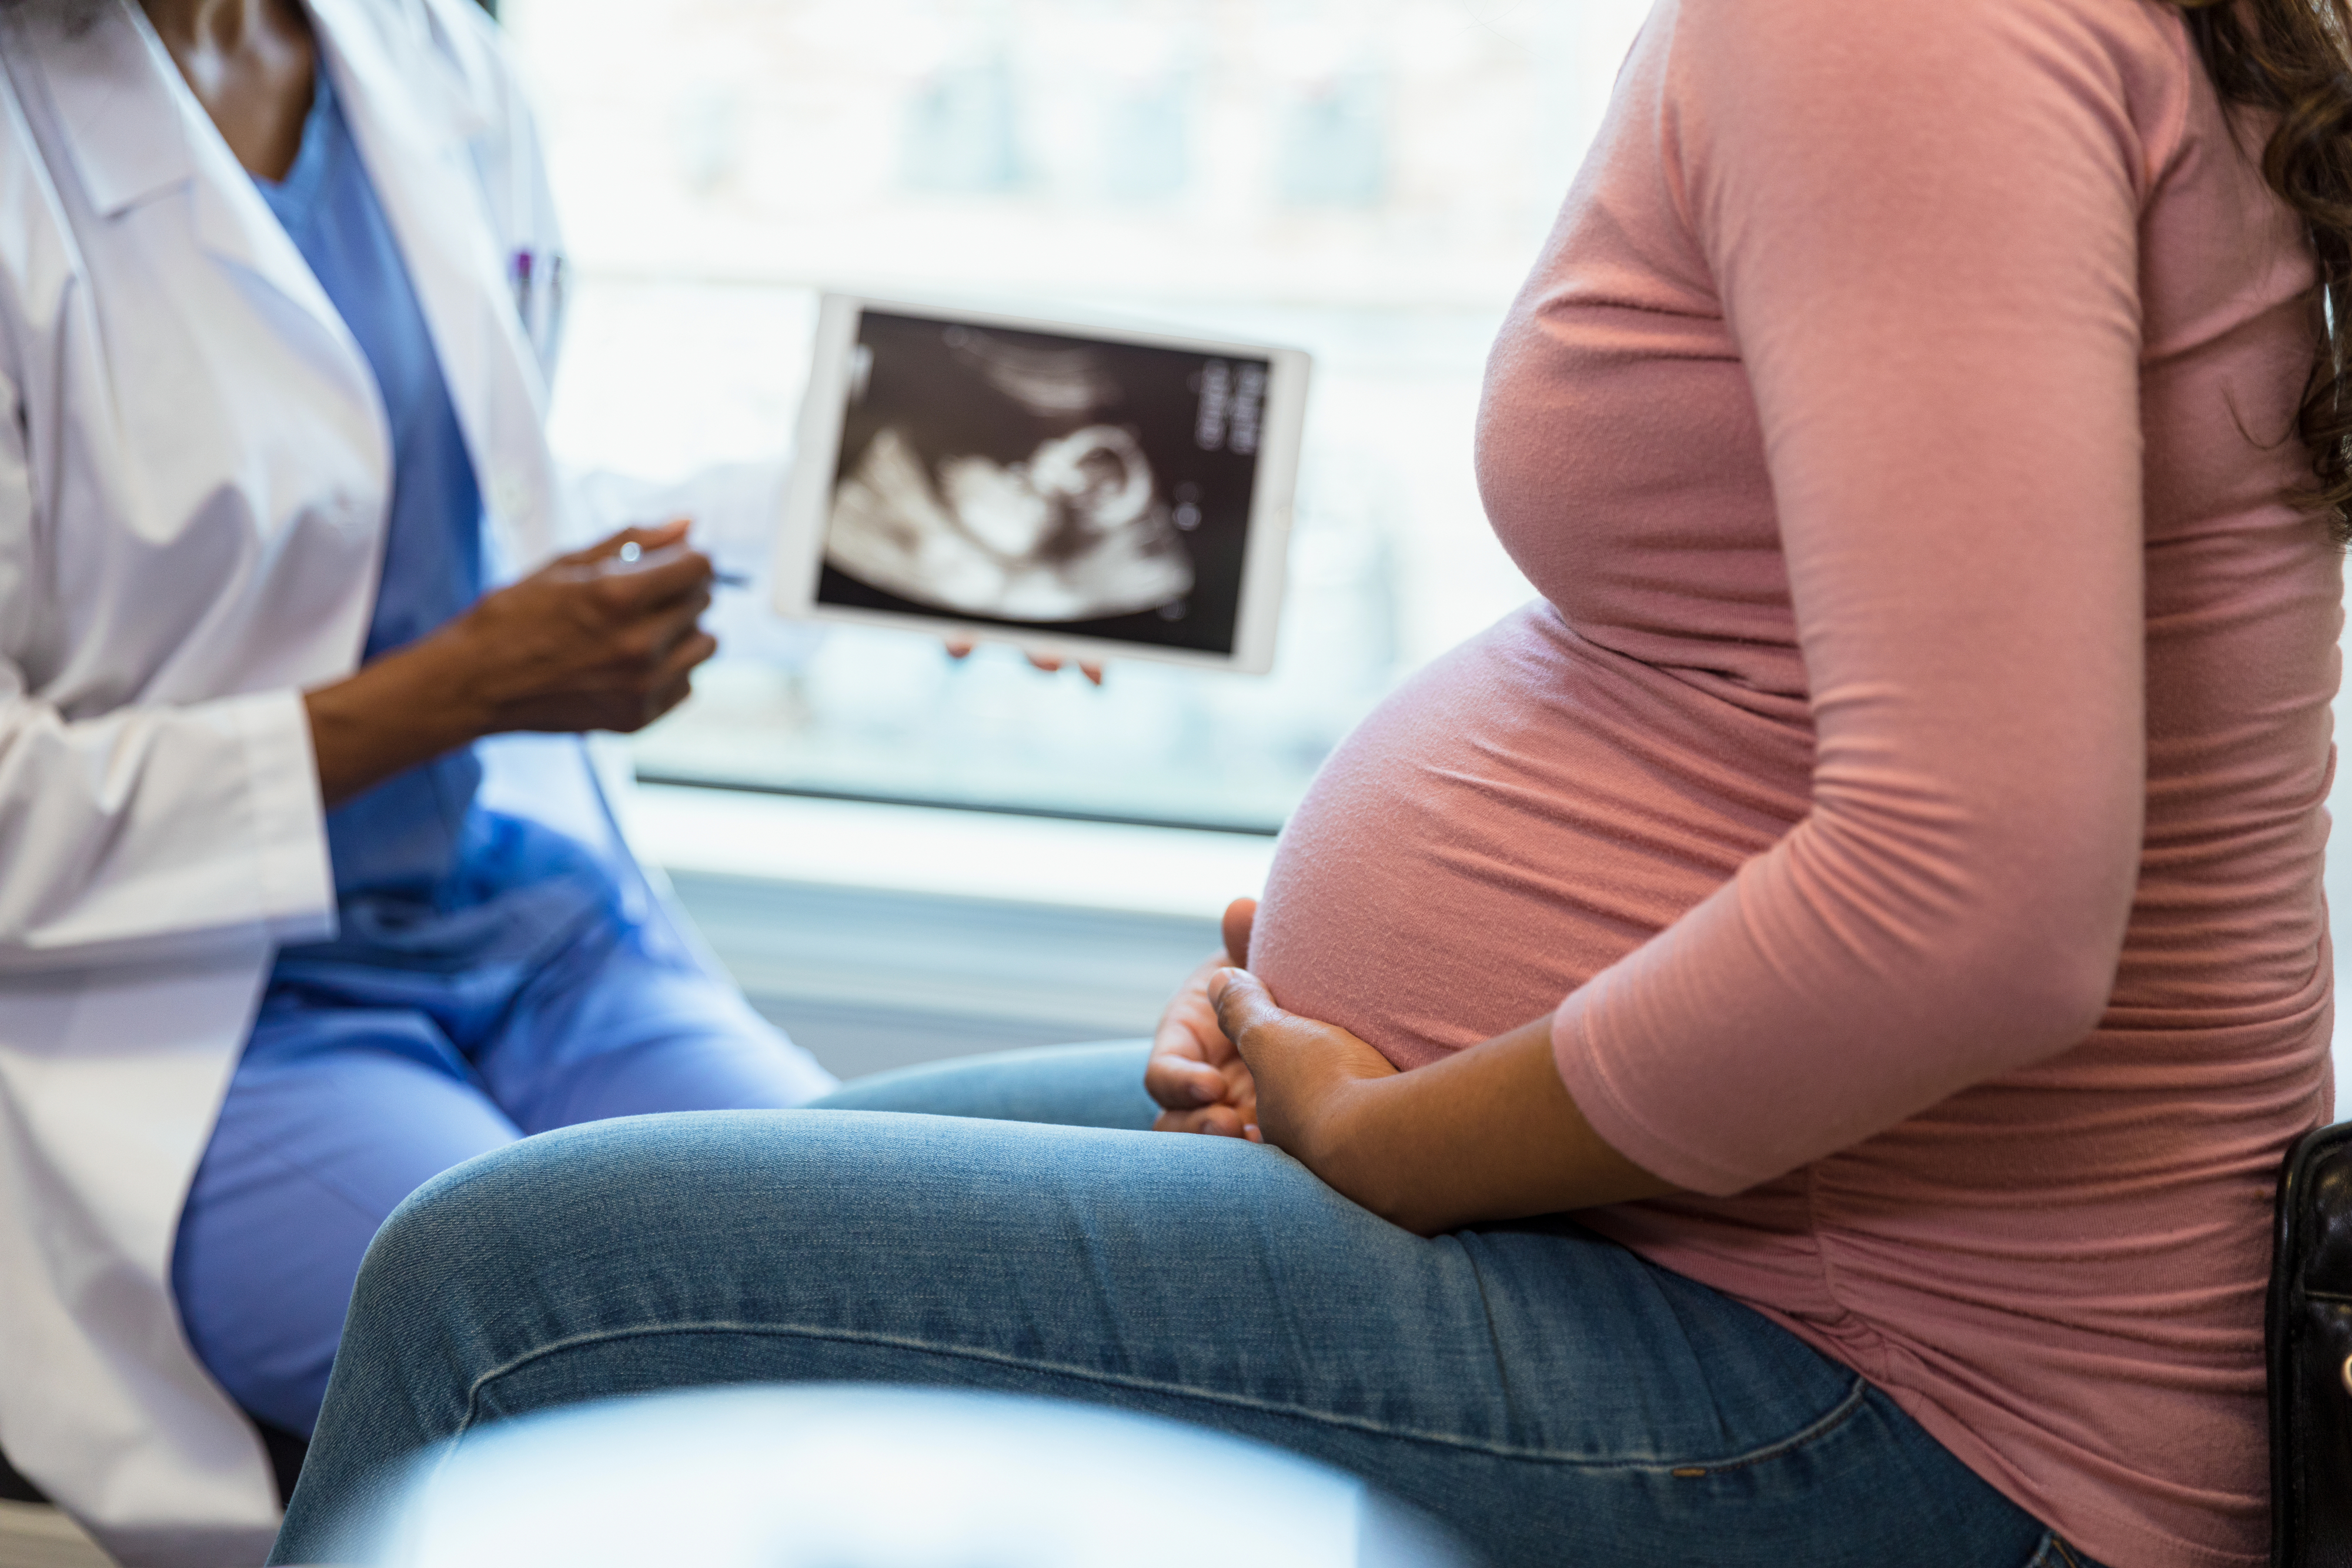 Pregnant person at a medical check-up with a doctor displaying an ultrasound image